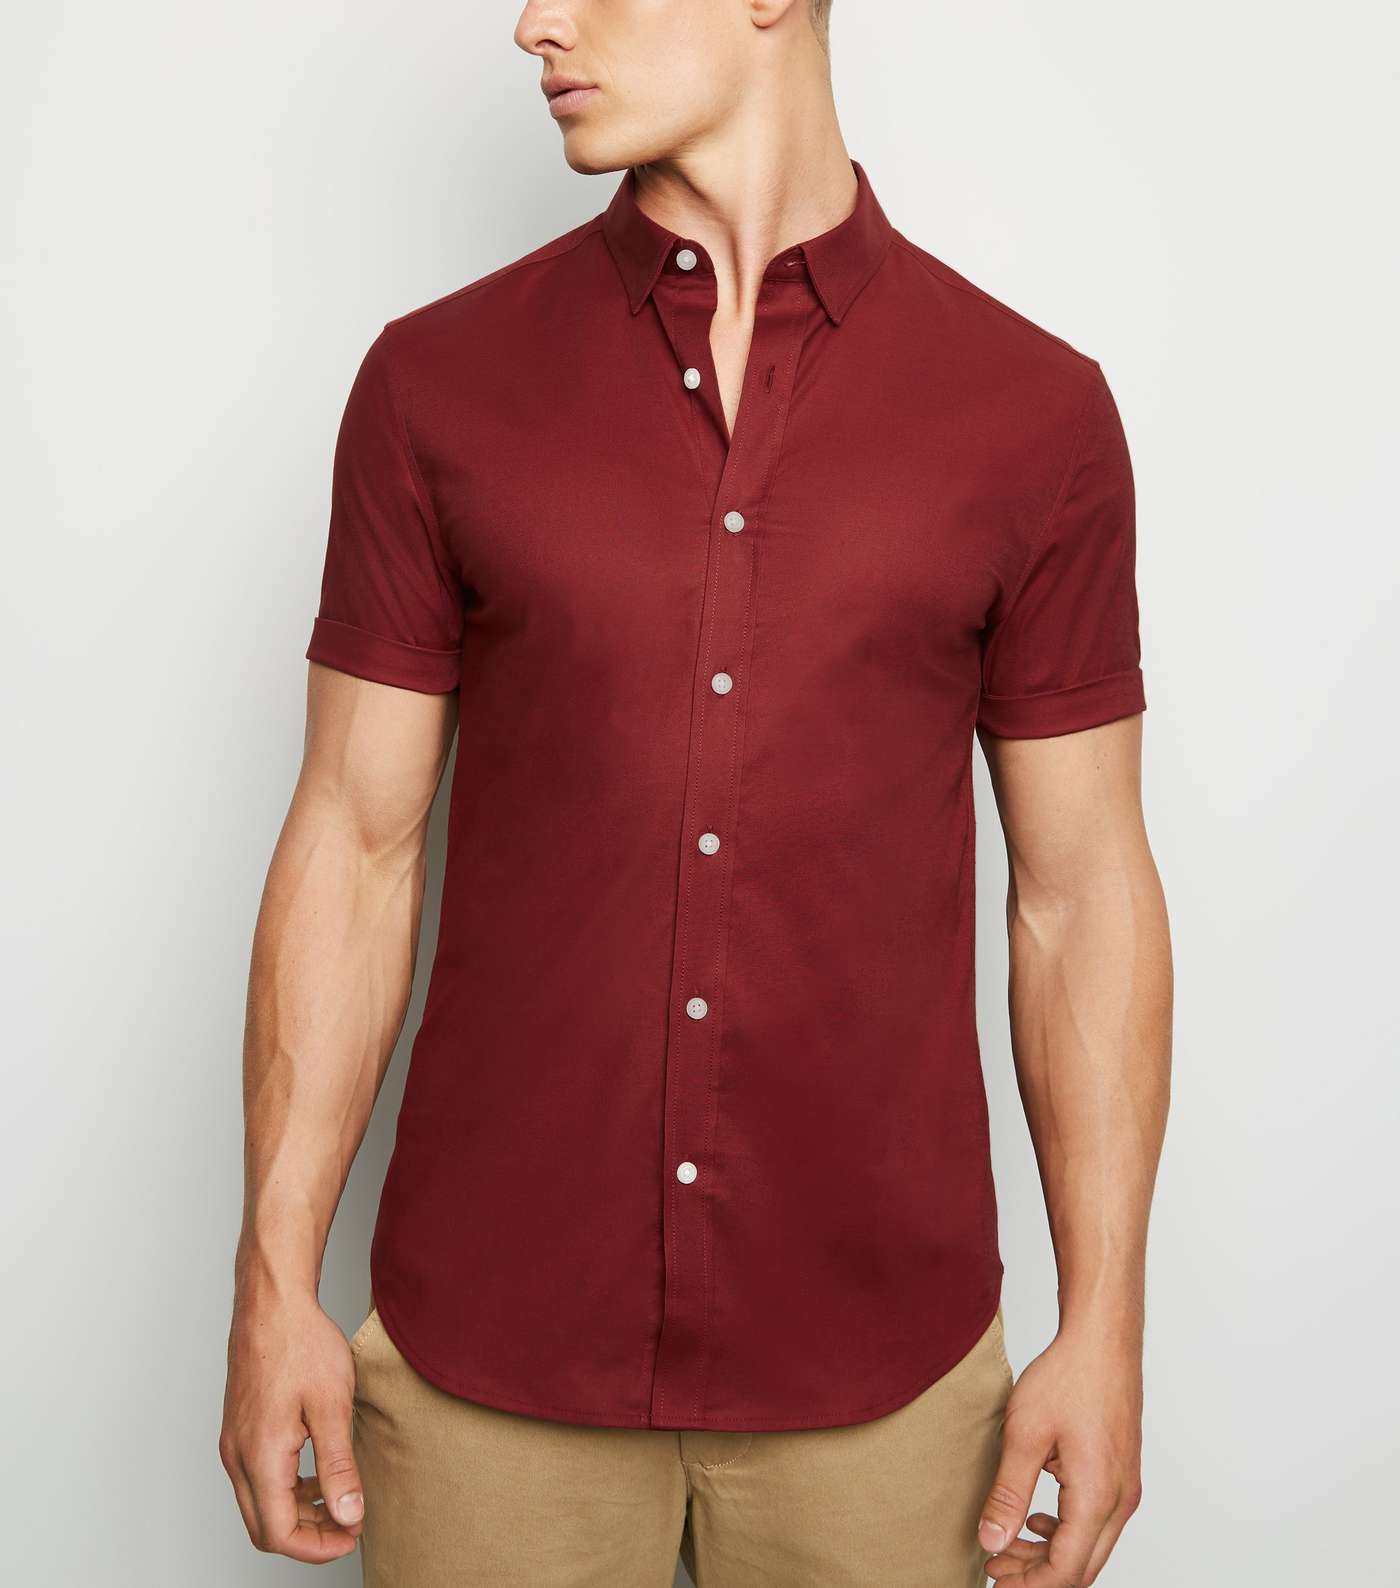 Burgundy Short Sleeve Muscle Fit Oxford Shirt